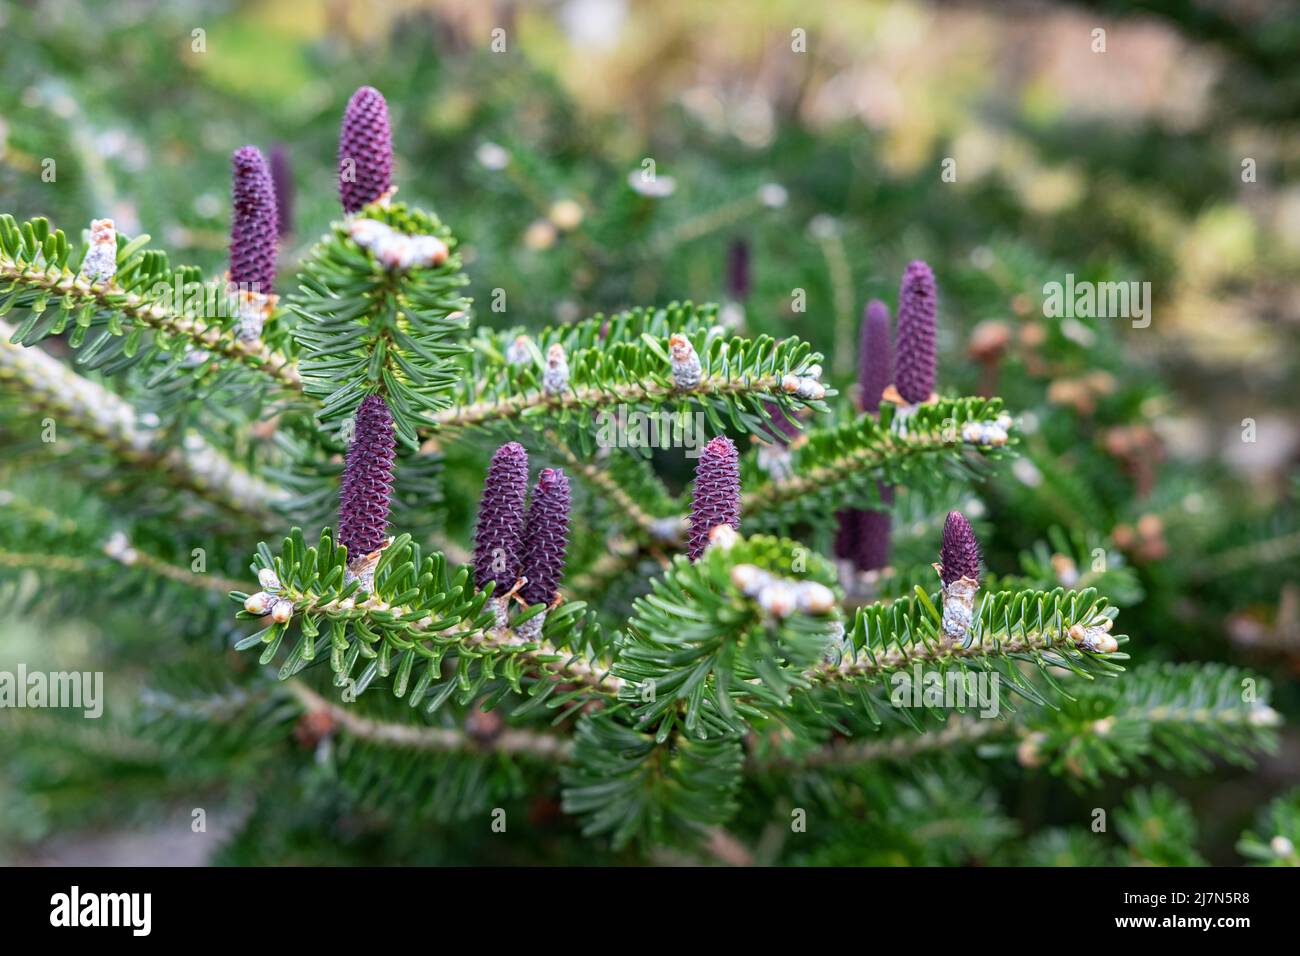 Korean blue emperor larch, also known as Korean fir or Abies koreana displaying colorful purple cones holding upright along lush green brunches Stock Photo